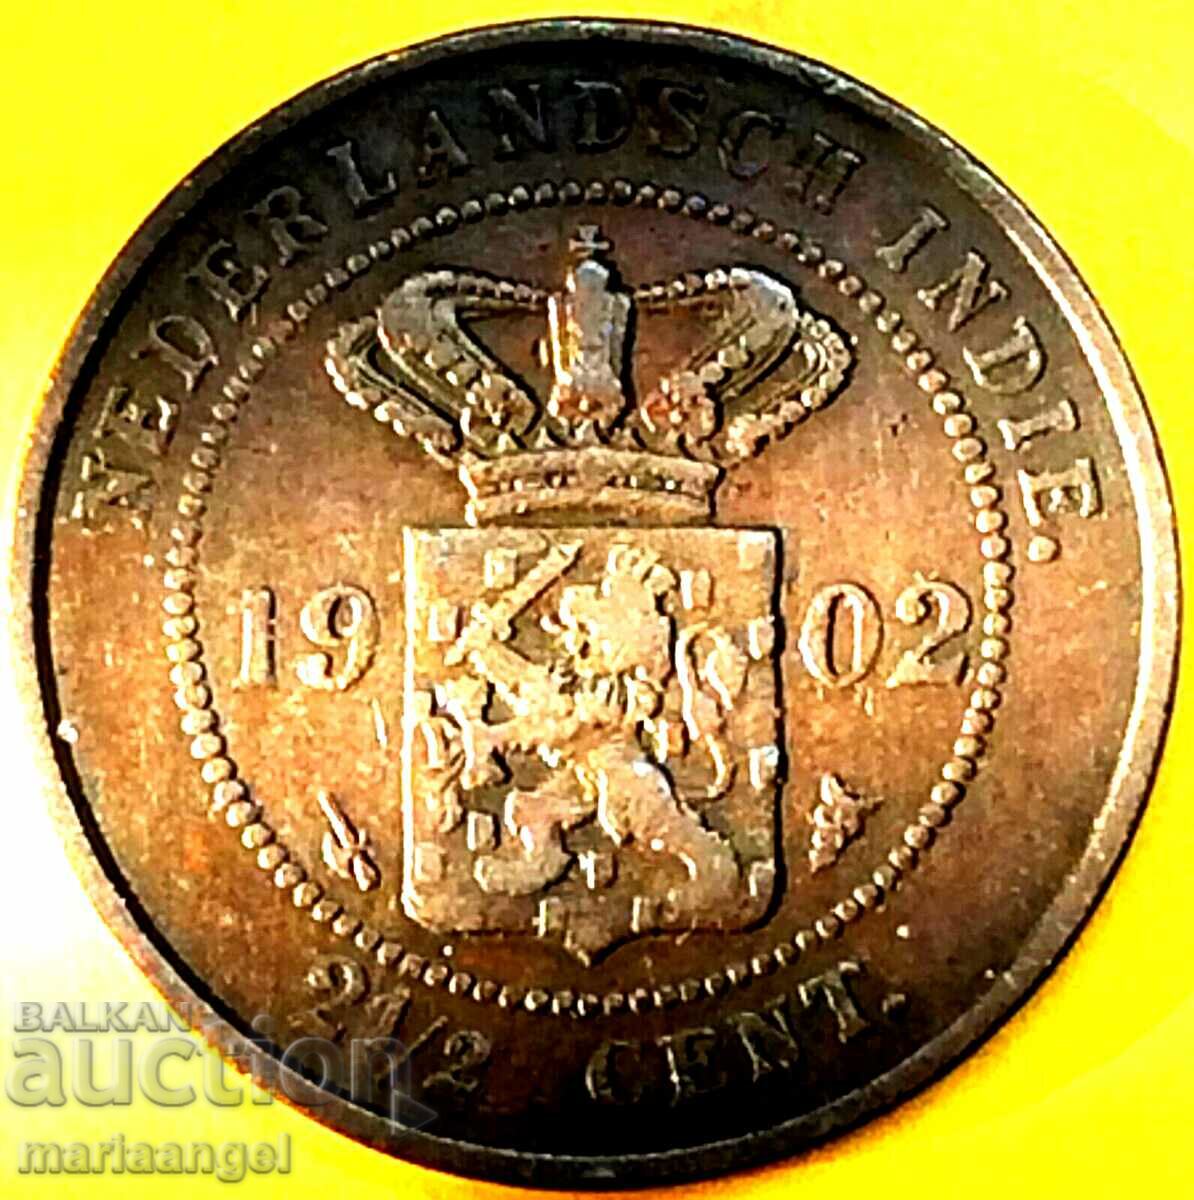 Netherlands 1902 2 1/2 cent - extremely rare